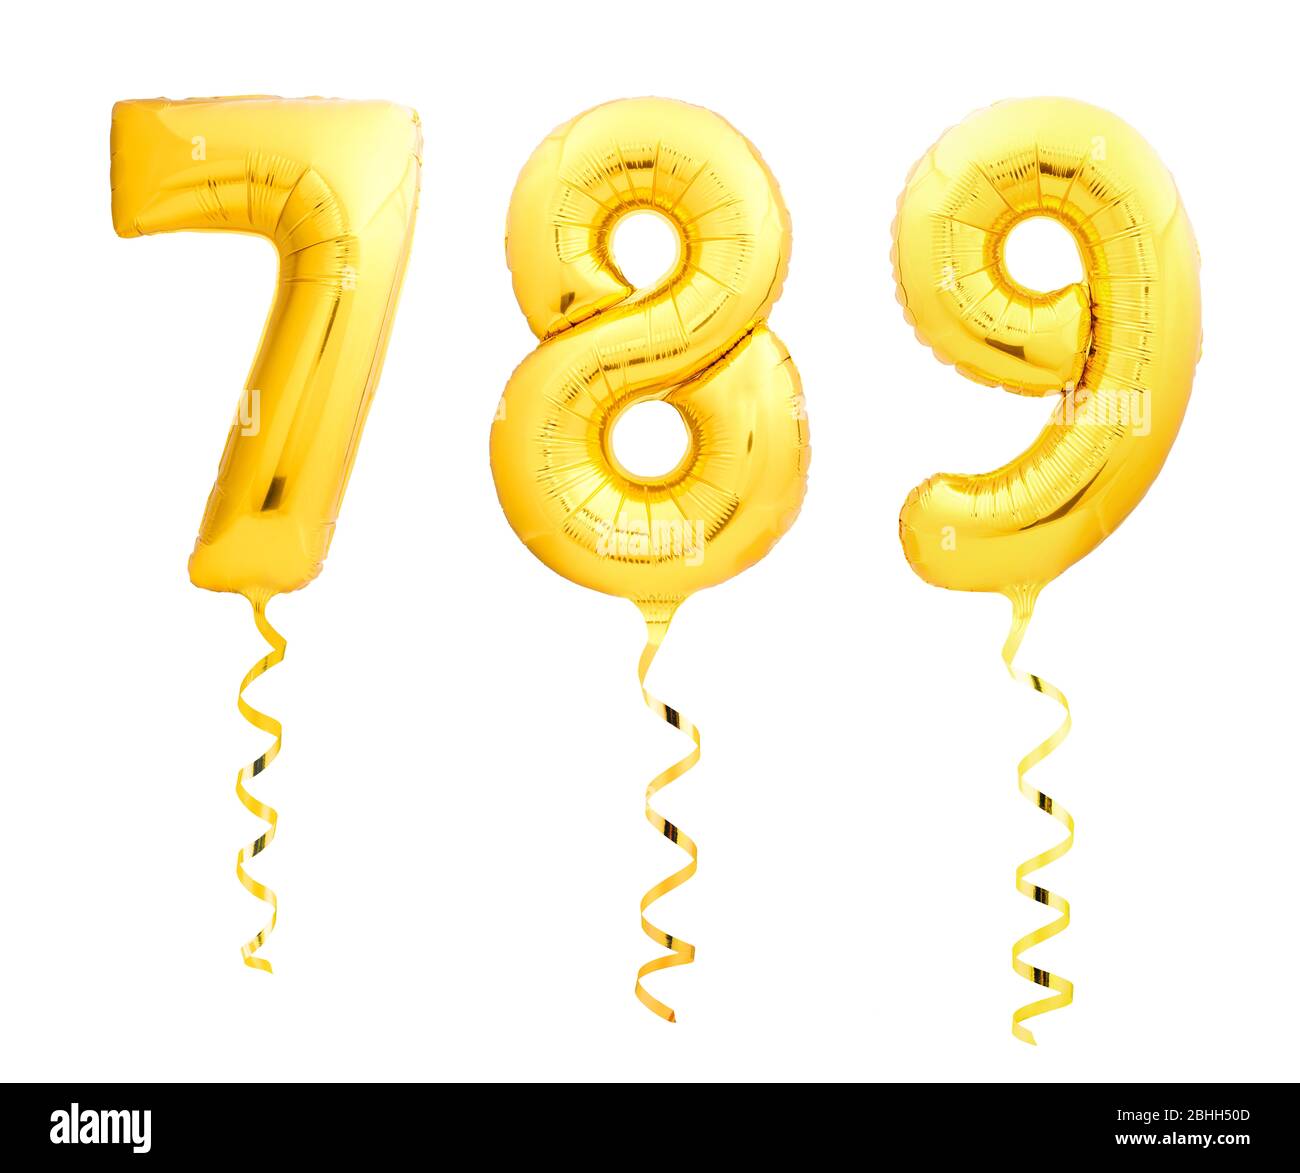 Golden numbers 7, 8, 9 made of inflatable balloons with golden ribbons isolated on white Stock Photo